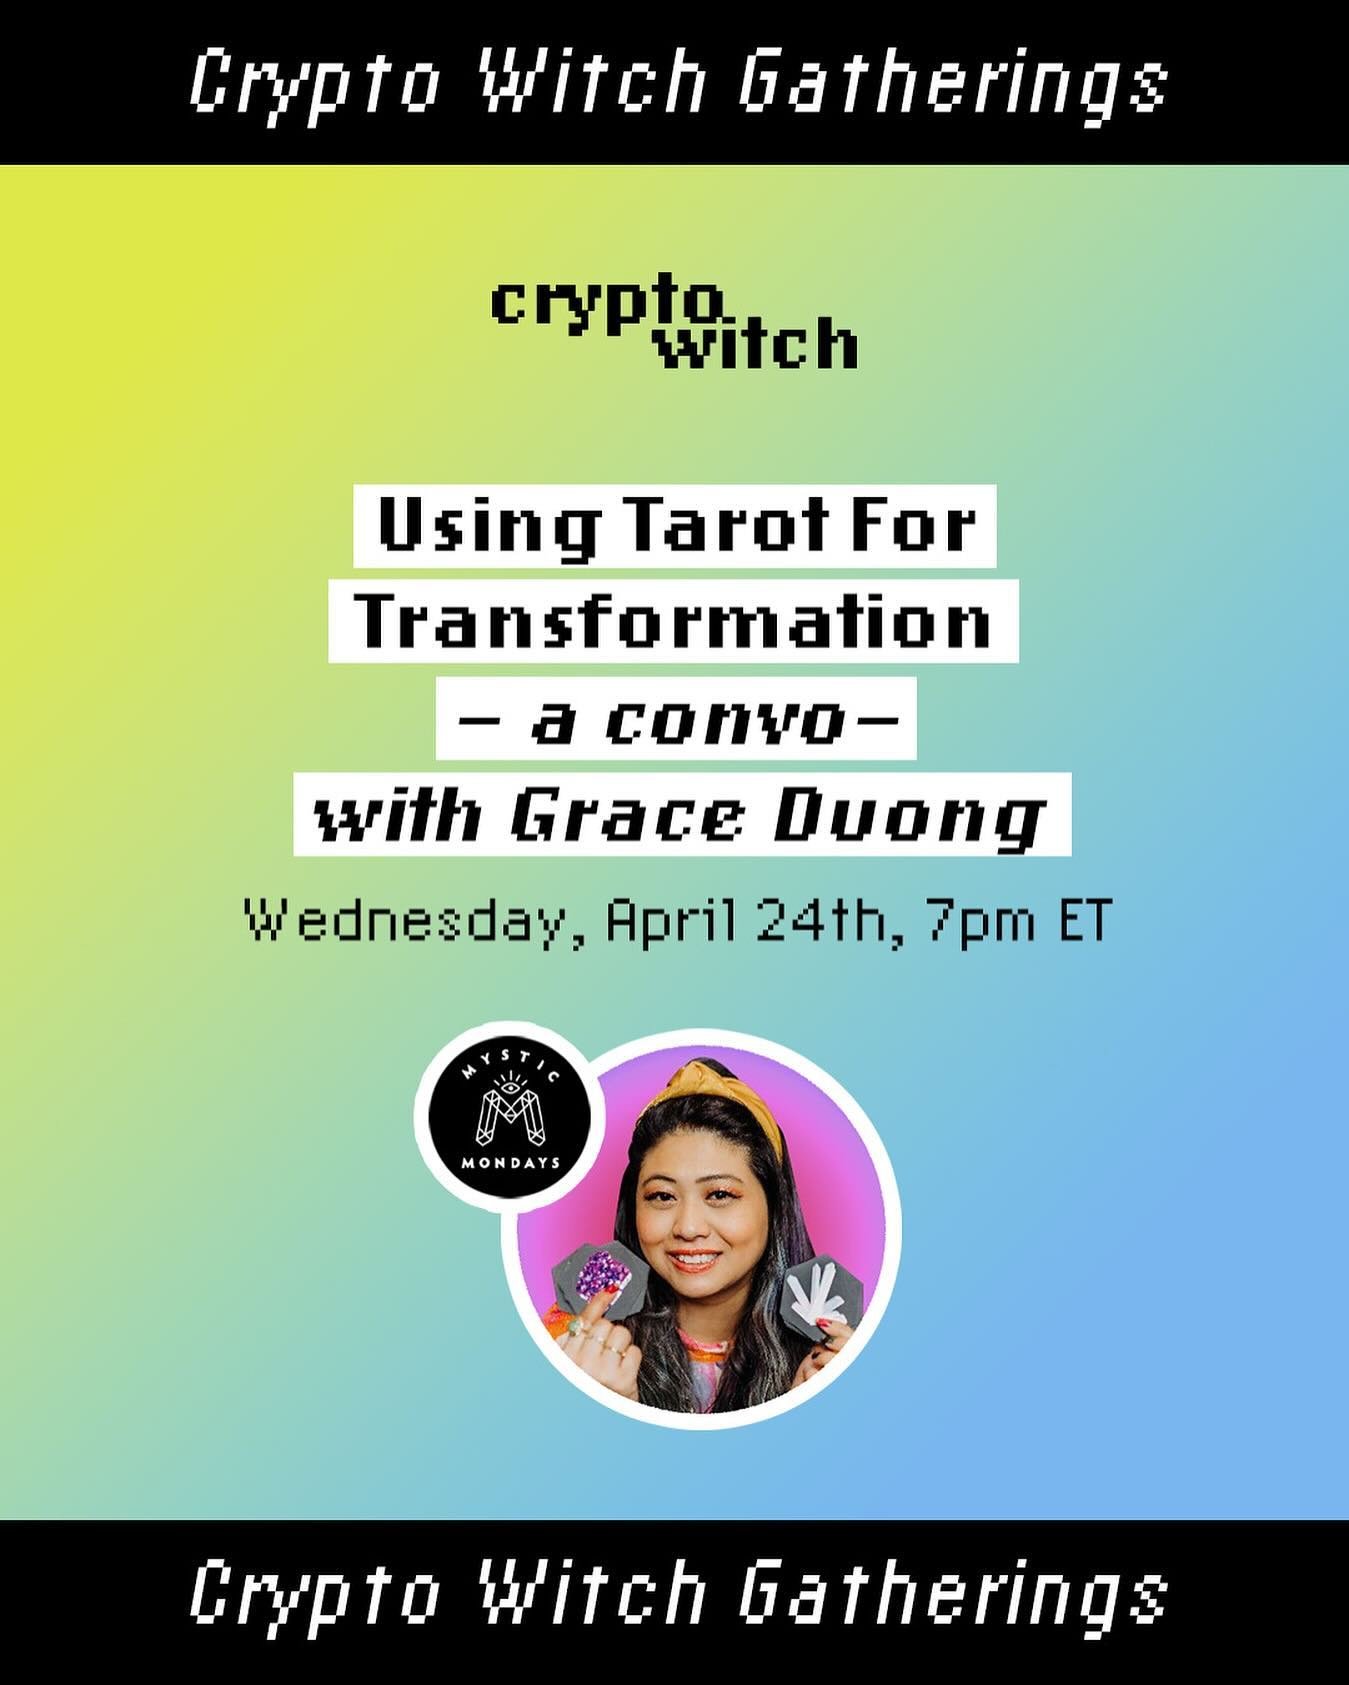 ‼️ Wednesday ‼️ We&rsquo;re chatting with Grace Duong, founder of Mystic Mondays, on how to use Tarot for transformation! 🔮 Grace&rsquo;s work at Mystic Mondays has been featured in Bustle, Vogue, Cosmo, The Strategist, Refinery29, and lots more mor